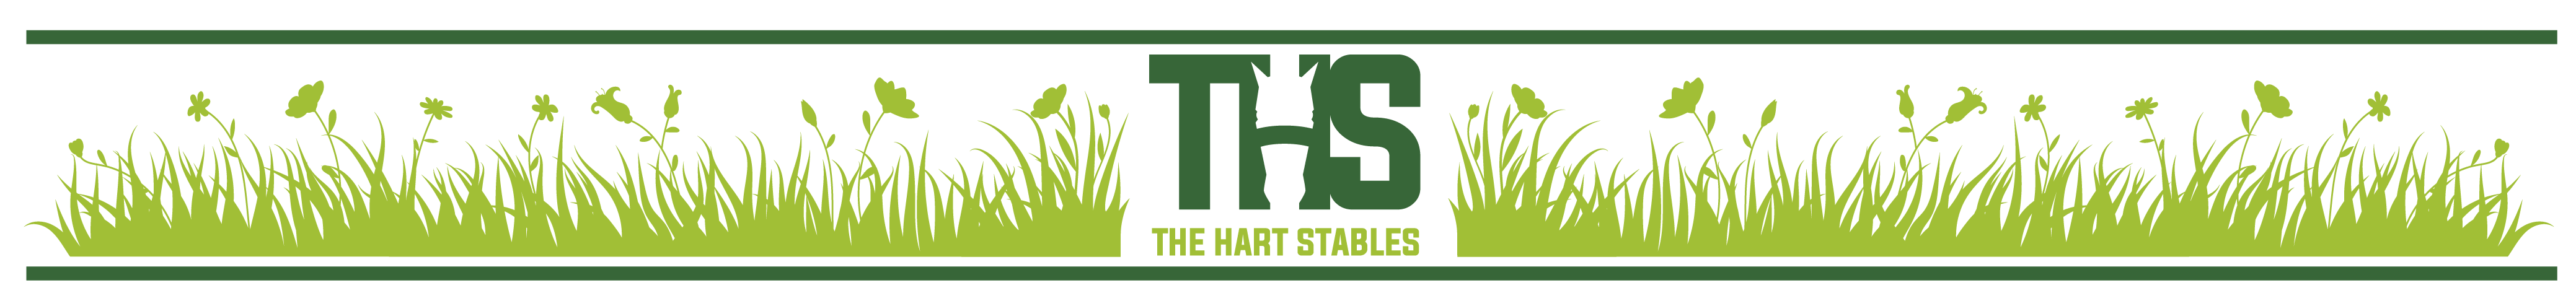 THE HART STABLES THS horses